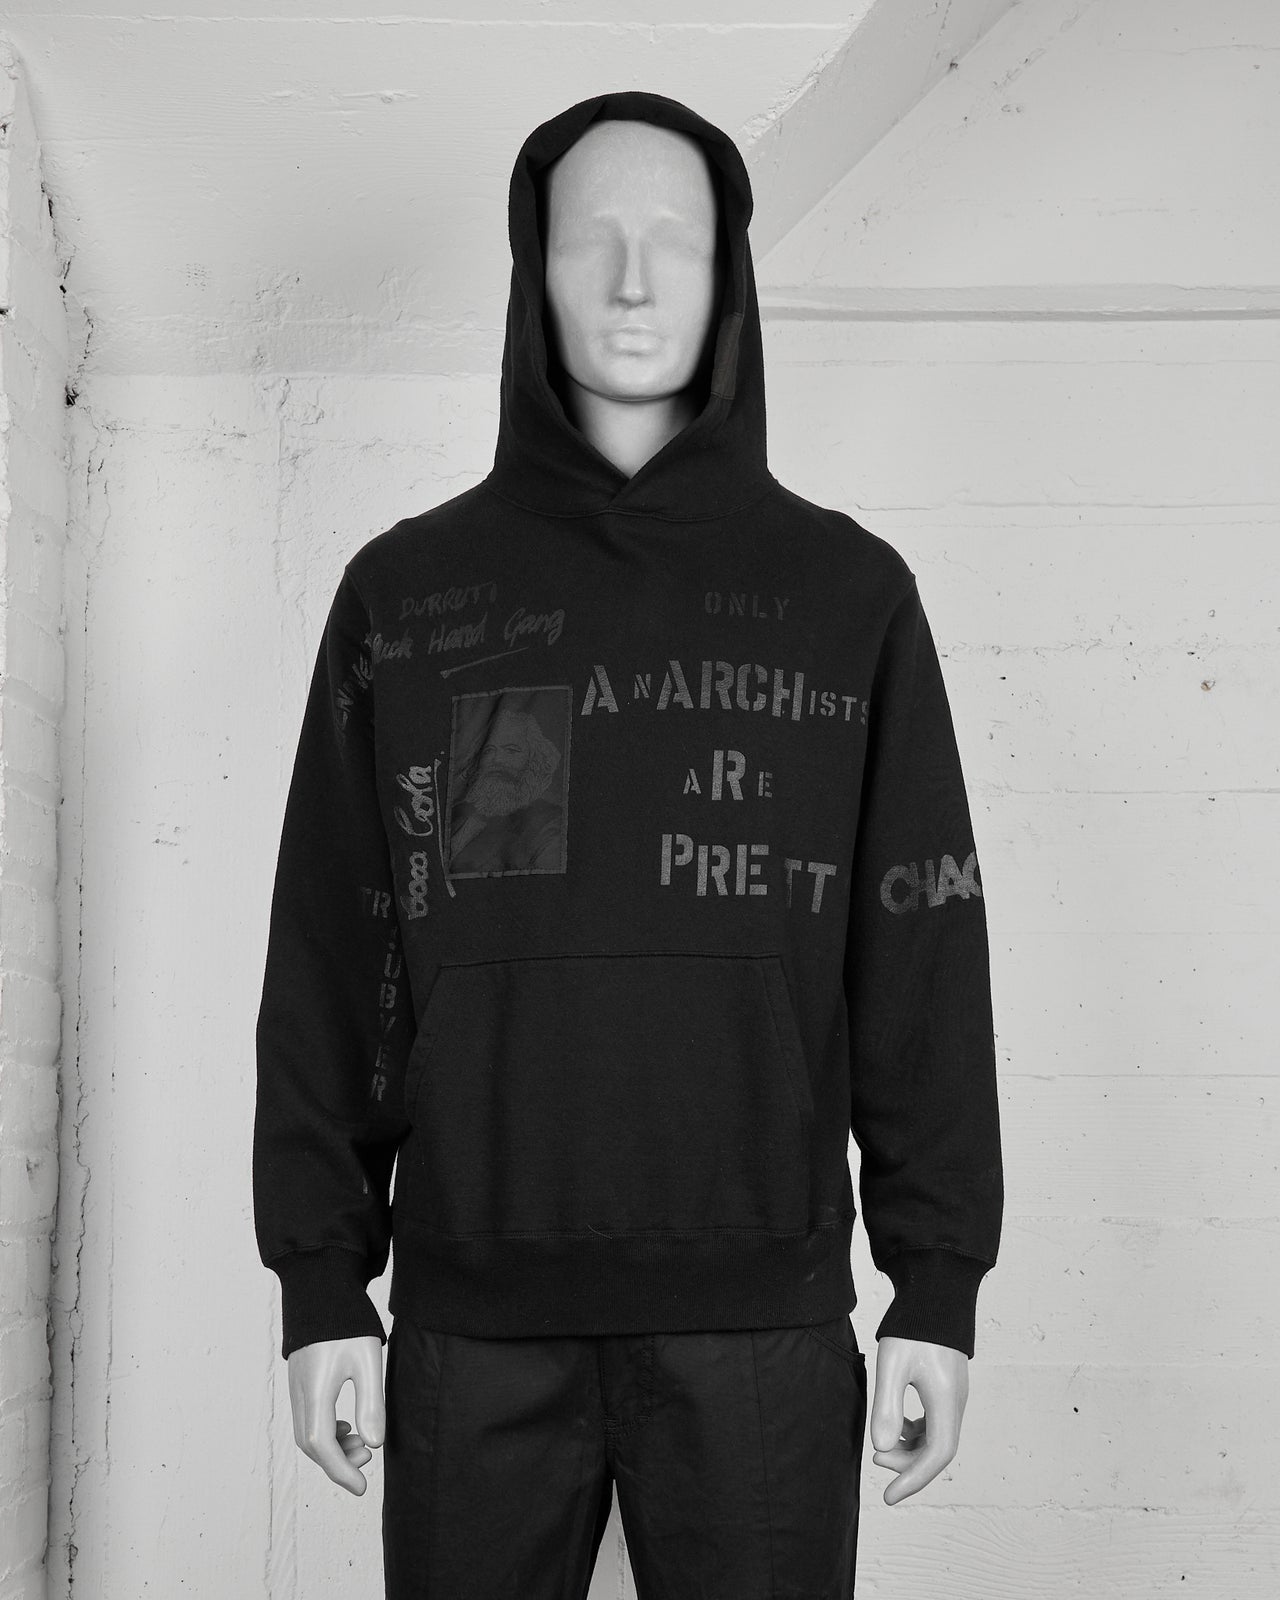 General Research Mao Zedong Anarcho-Communism Hoodie - AW01